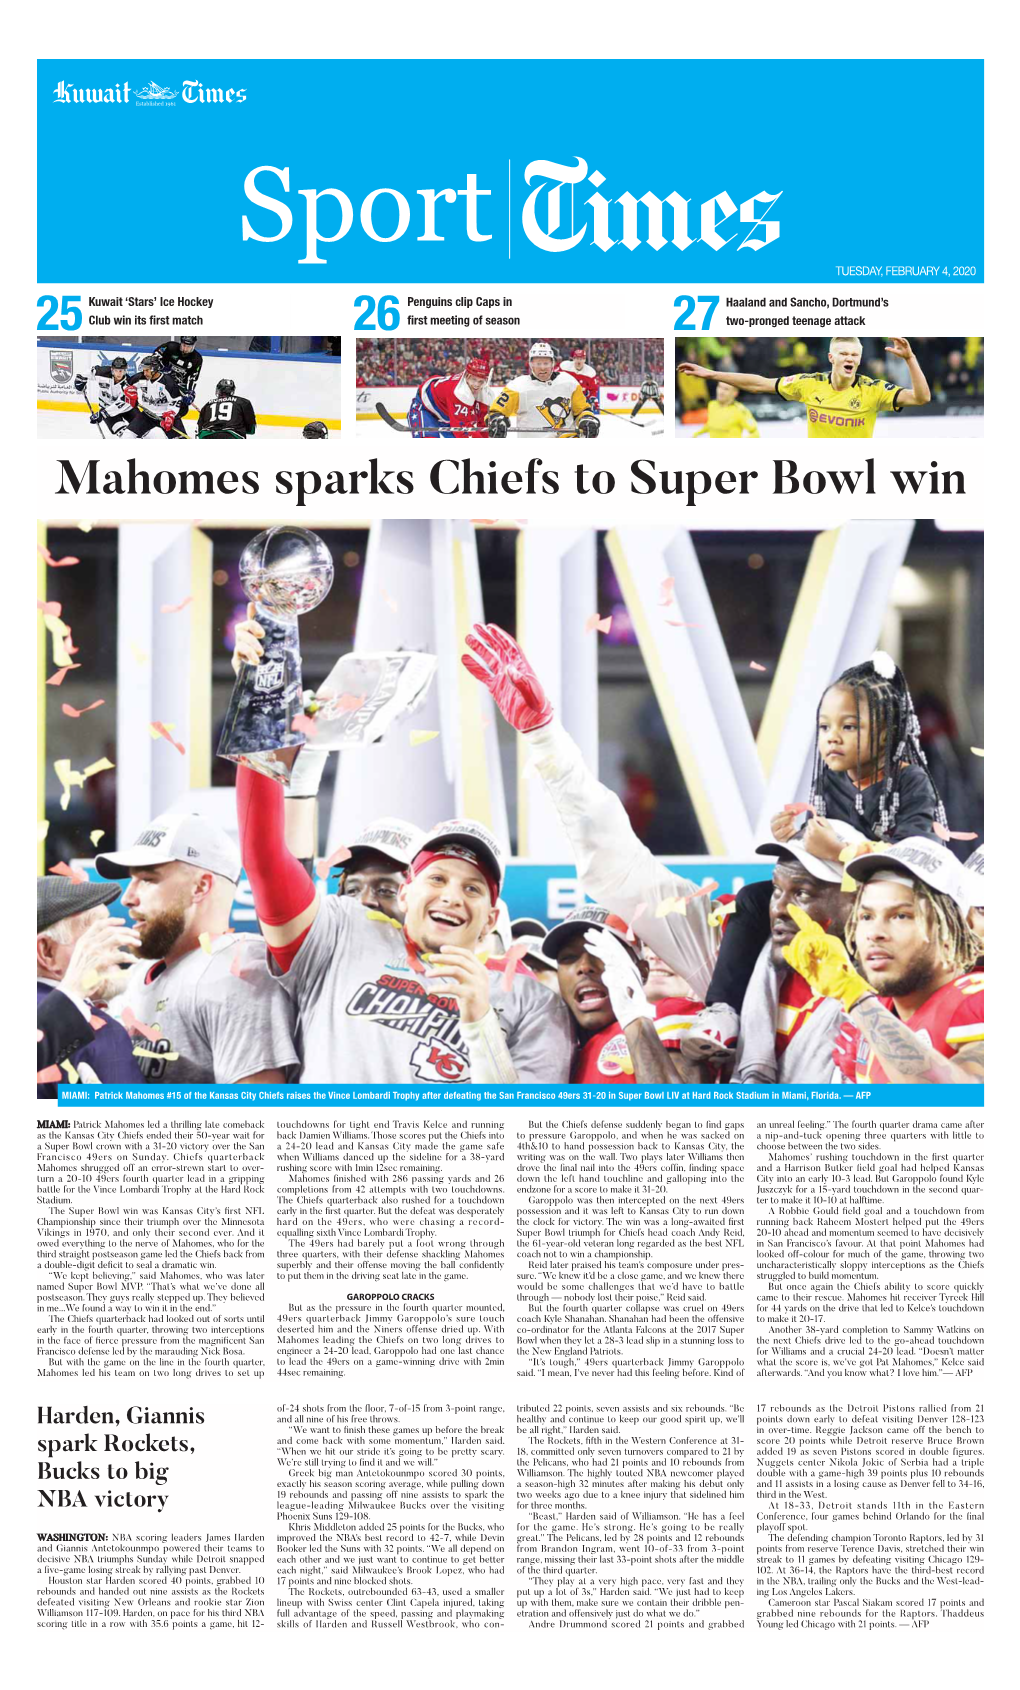 Mahomes Sparks Chiefs to Super Bowl Win